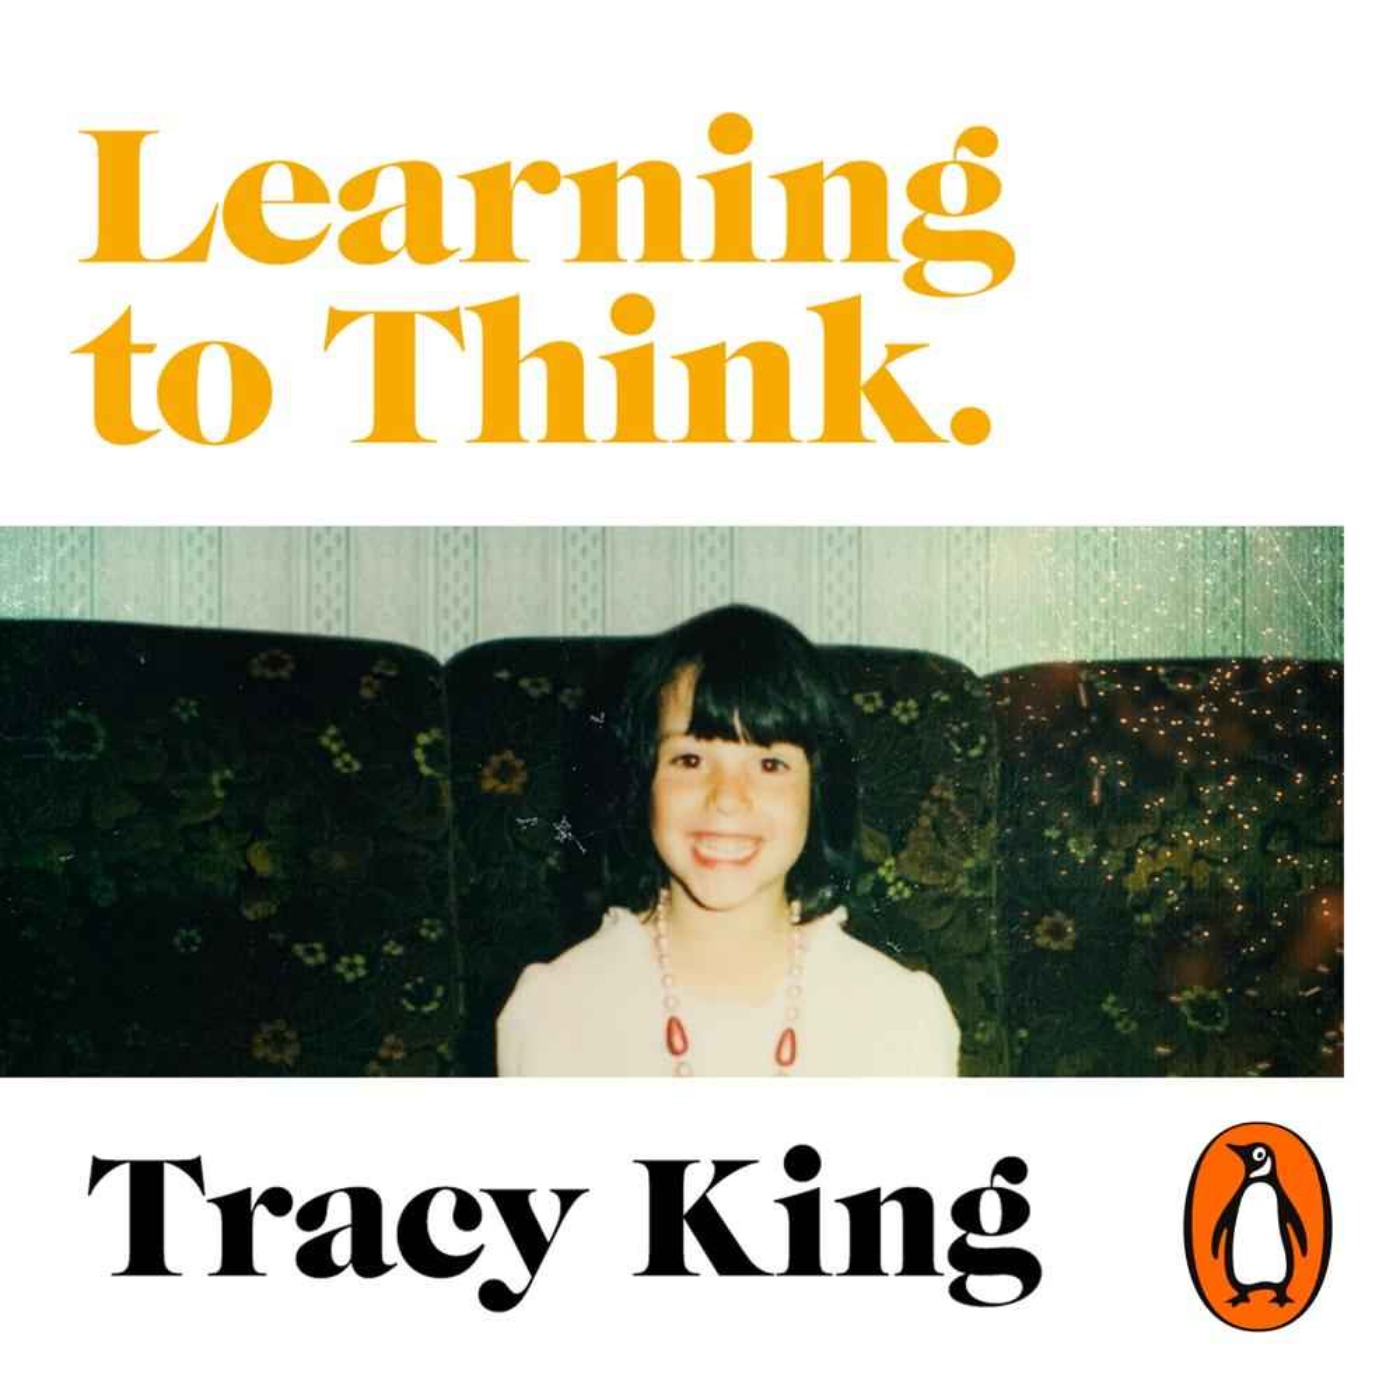 Little Atoms 886 - Tracy King's Learning To Think.